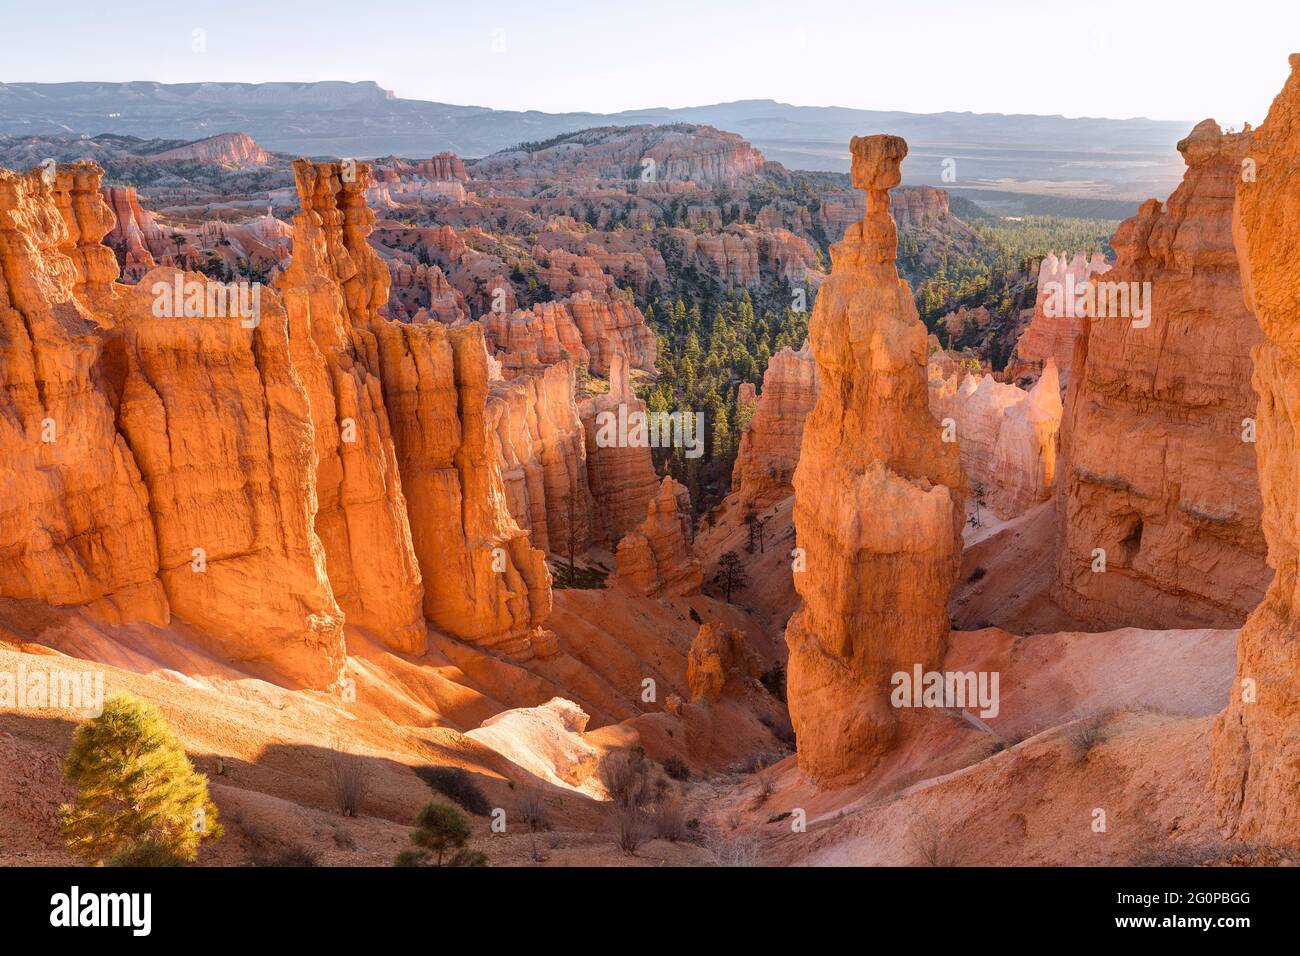 Thor's Hammer, Sunset point, Bryce Canyon, Utah, États-Unis Banque D'Images